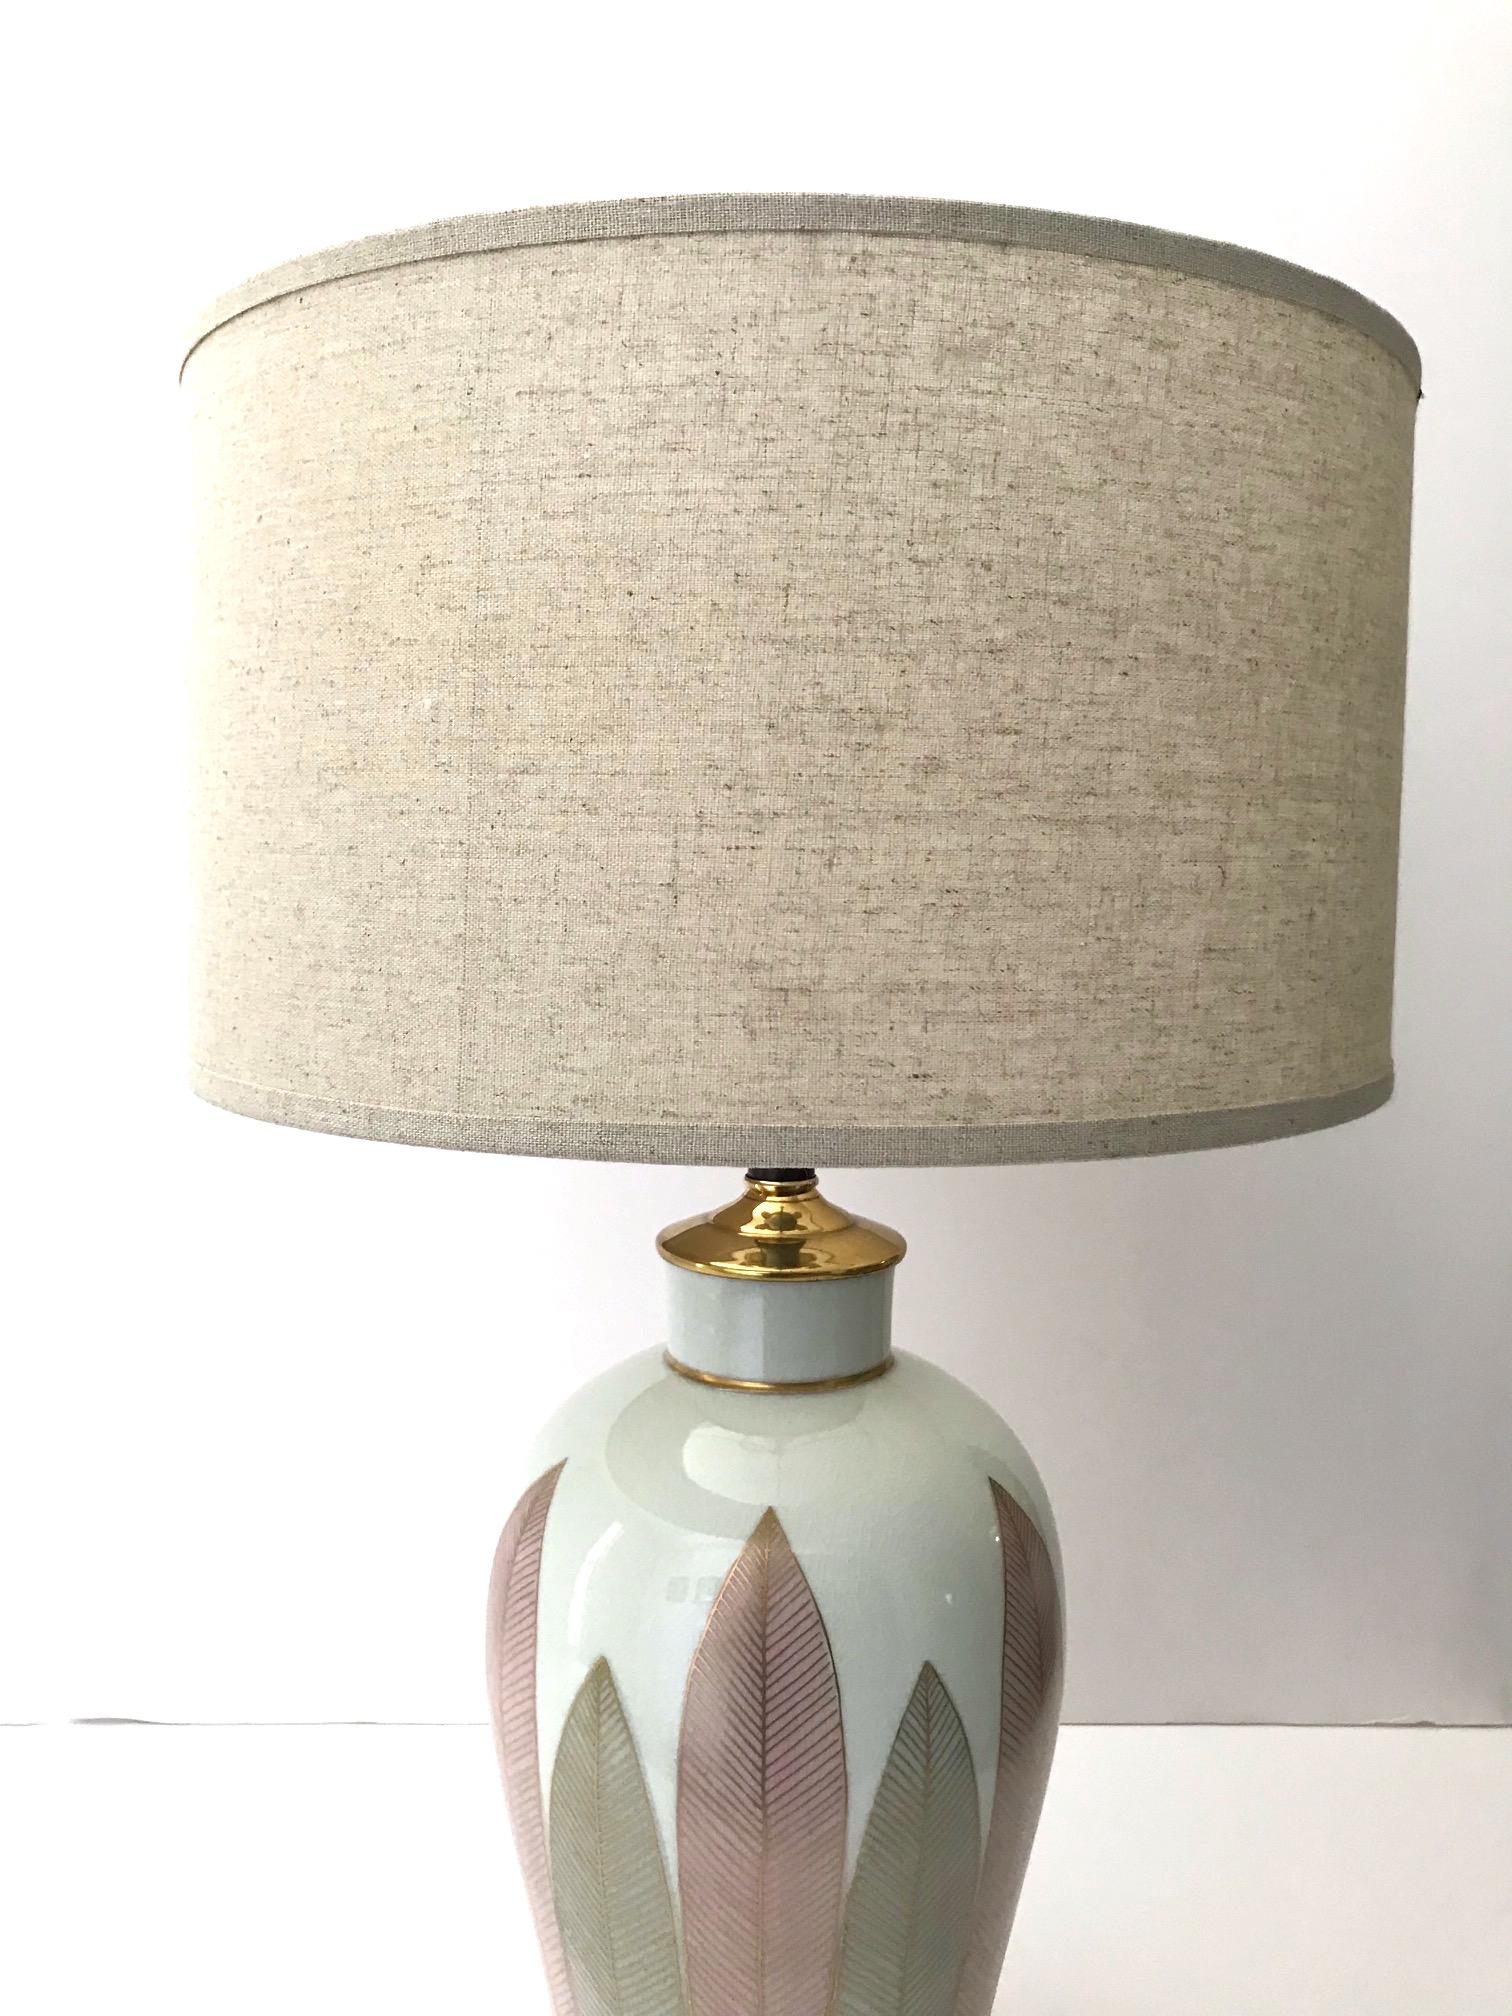 Pair of Japanese Hand Painted Porcelain Lamps in White, Grey, and Pink, C. 1970s For Sale 5